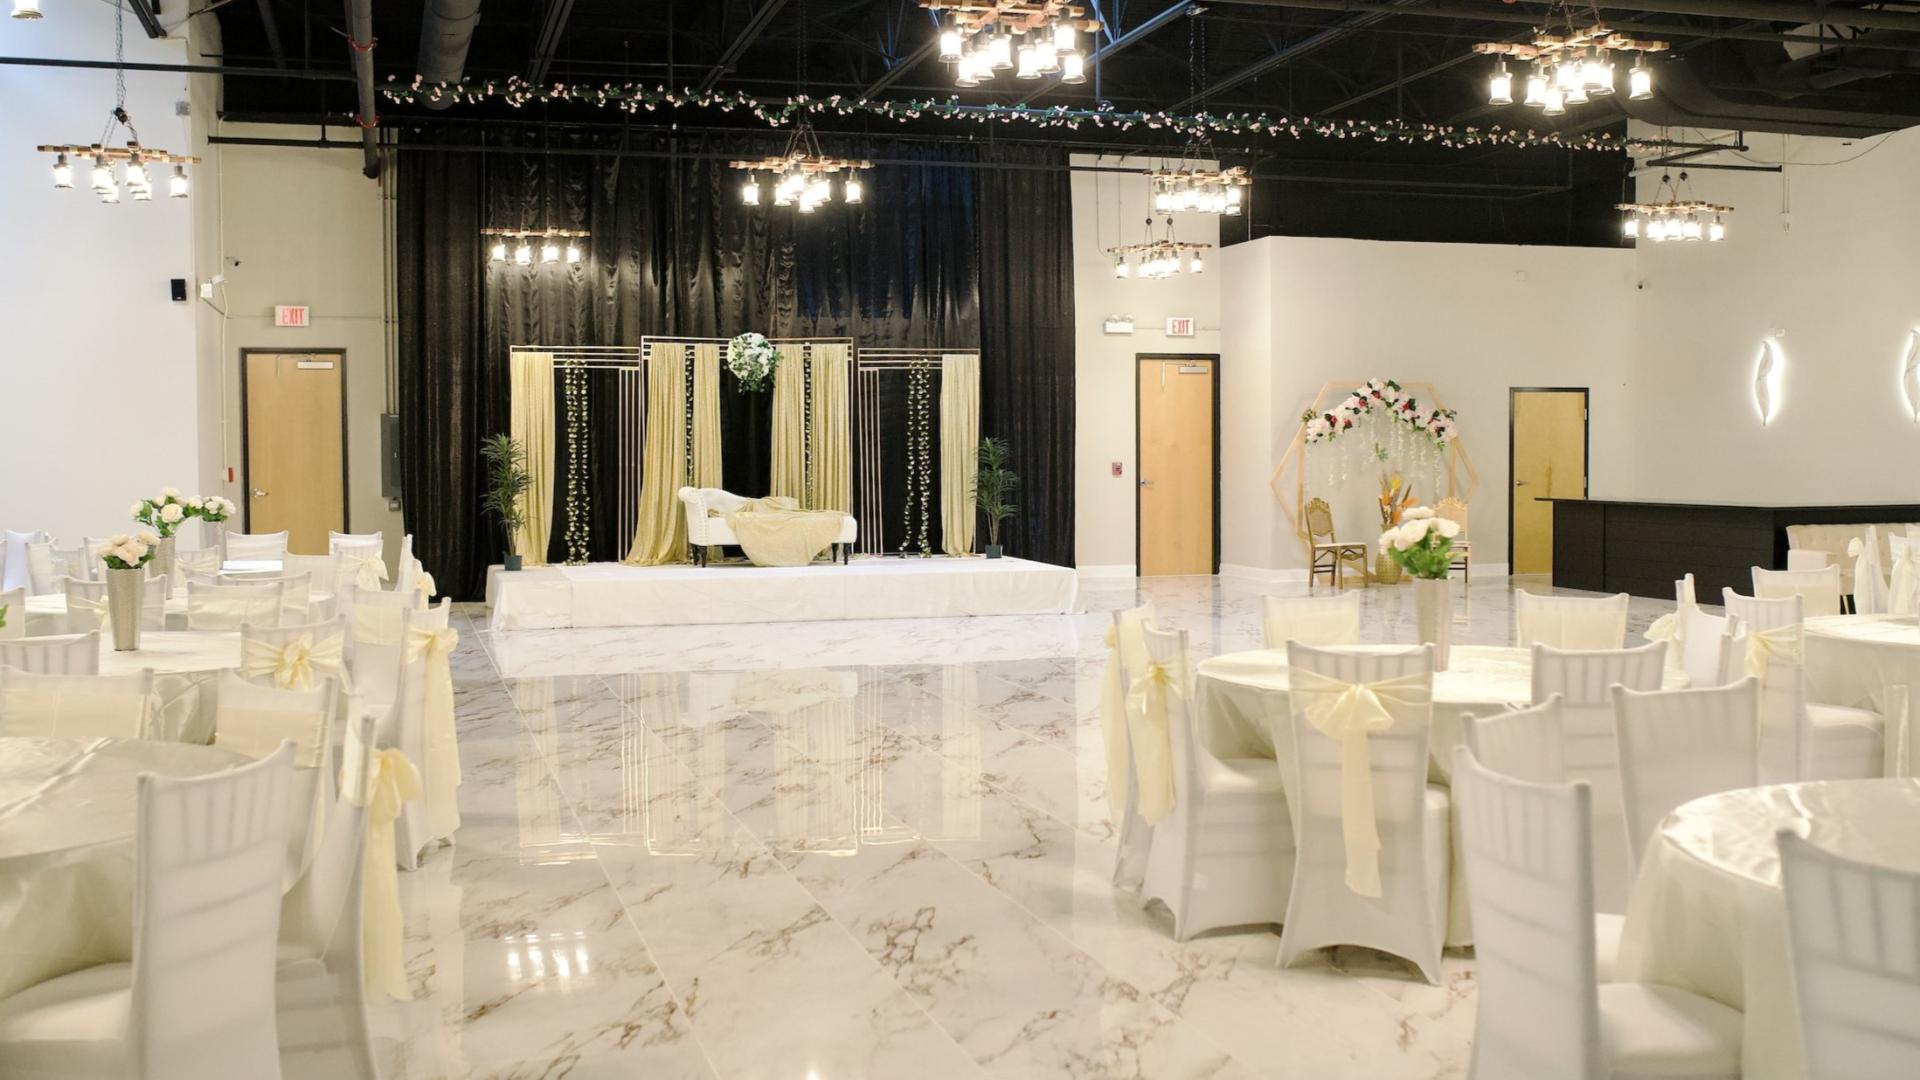 Small Hotel Wedding Venues for Rent in Chicago, IL